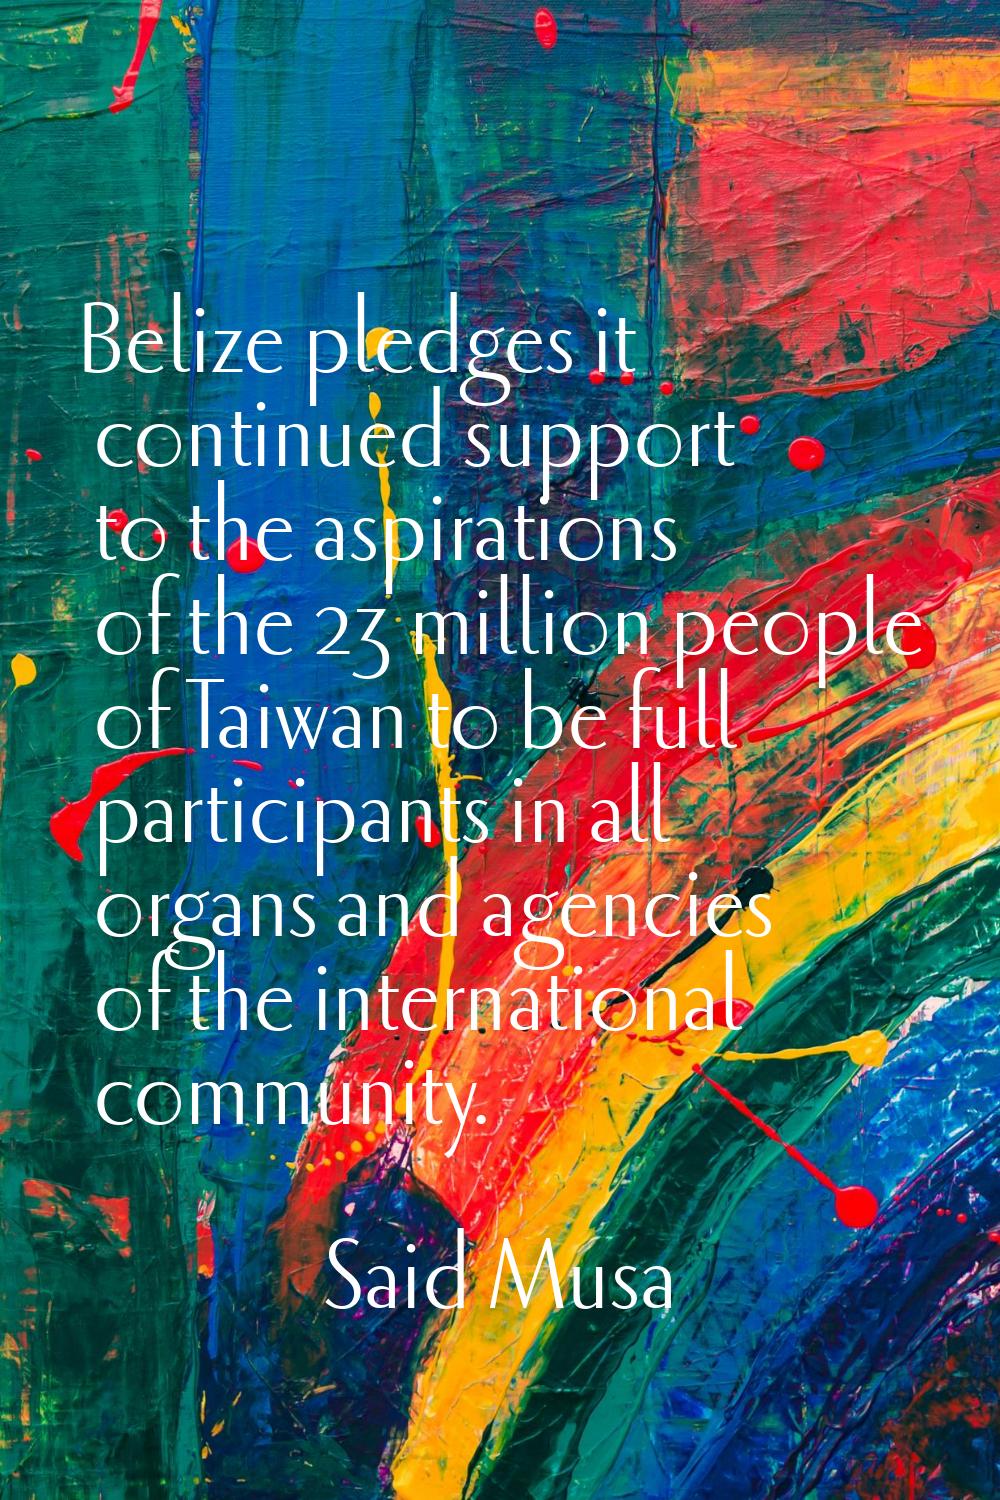 Belize pledges it continued support to the aspirations of the 23 million people of Taiwan to be ful